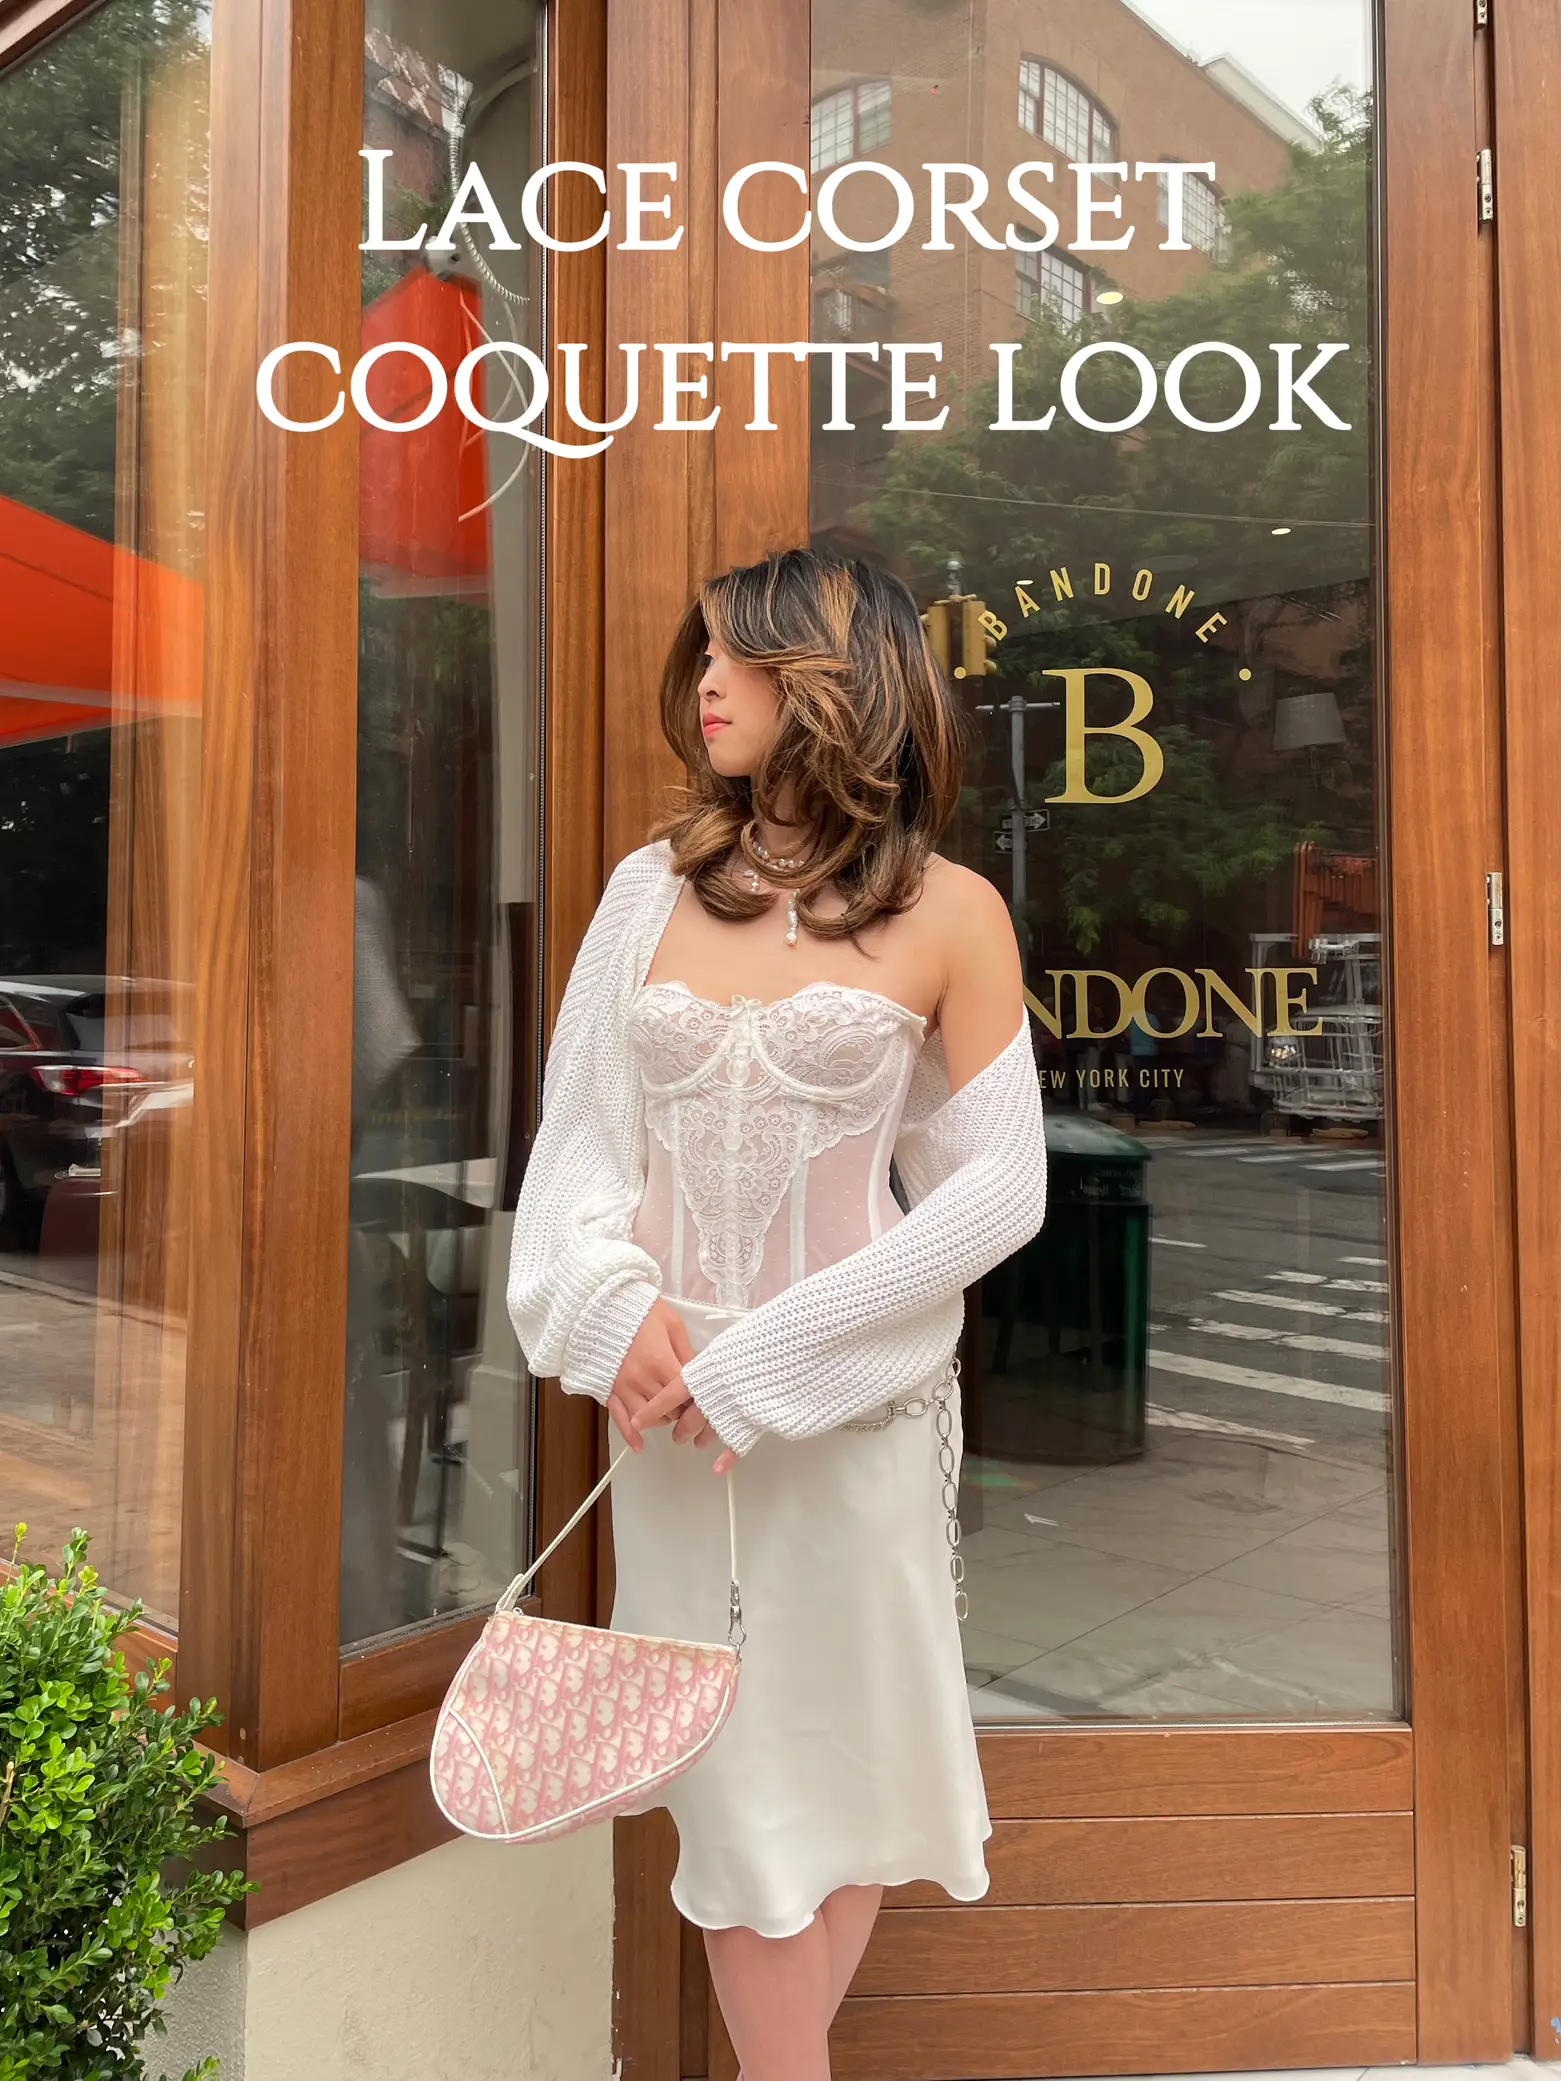 Lace Corset Coquette Look, Gallery posted by itsreireii